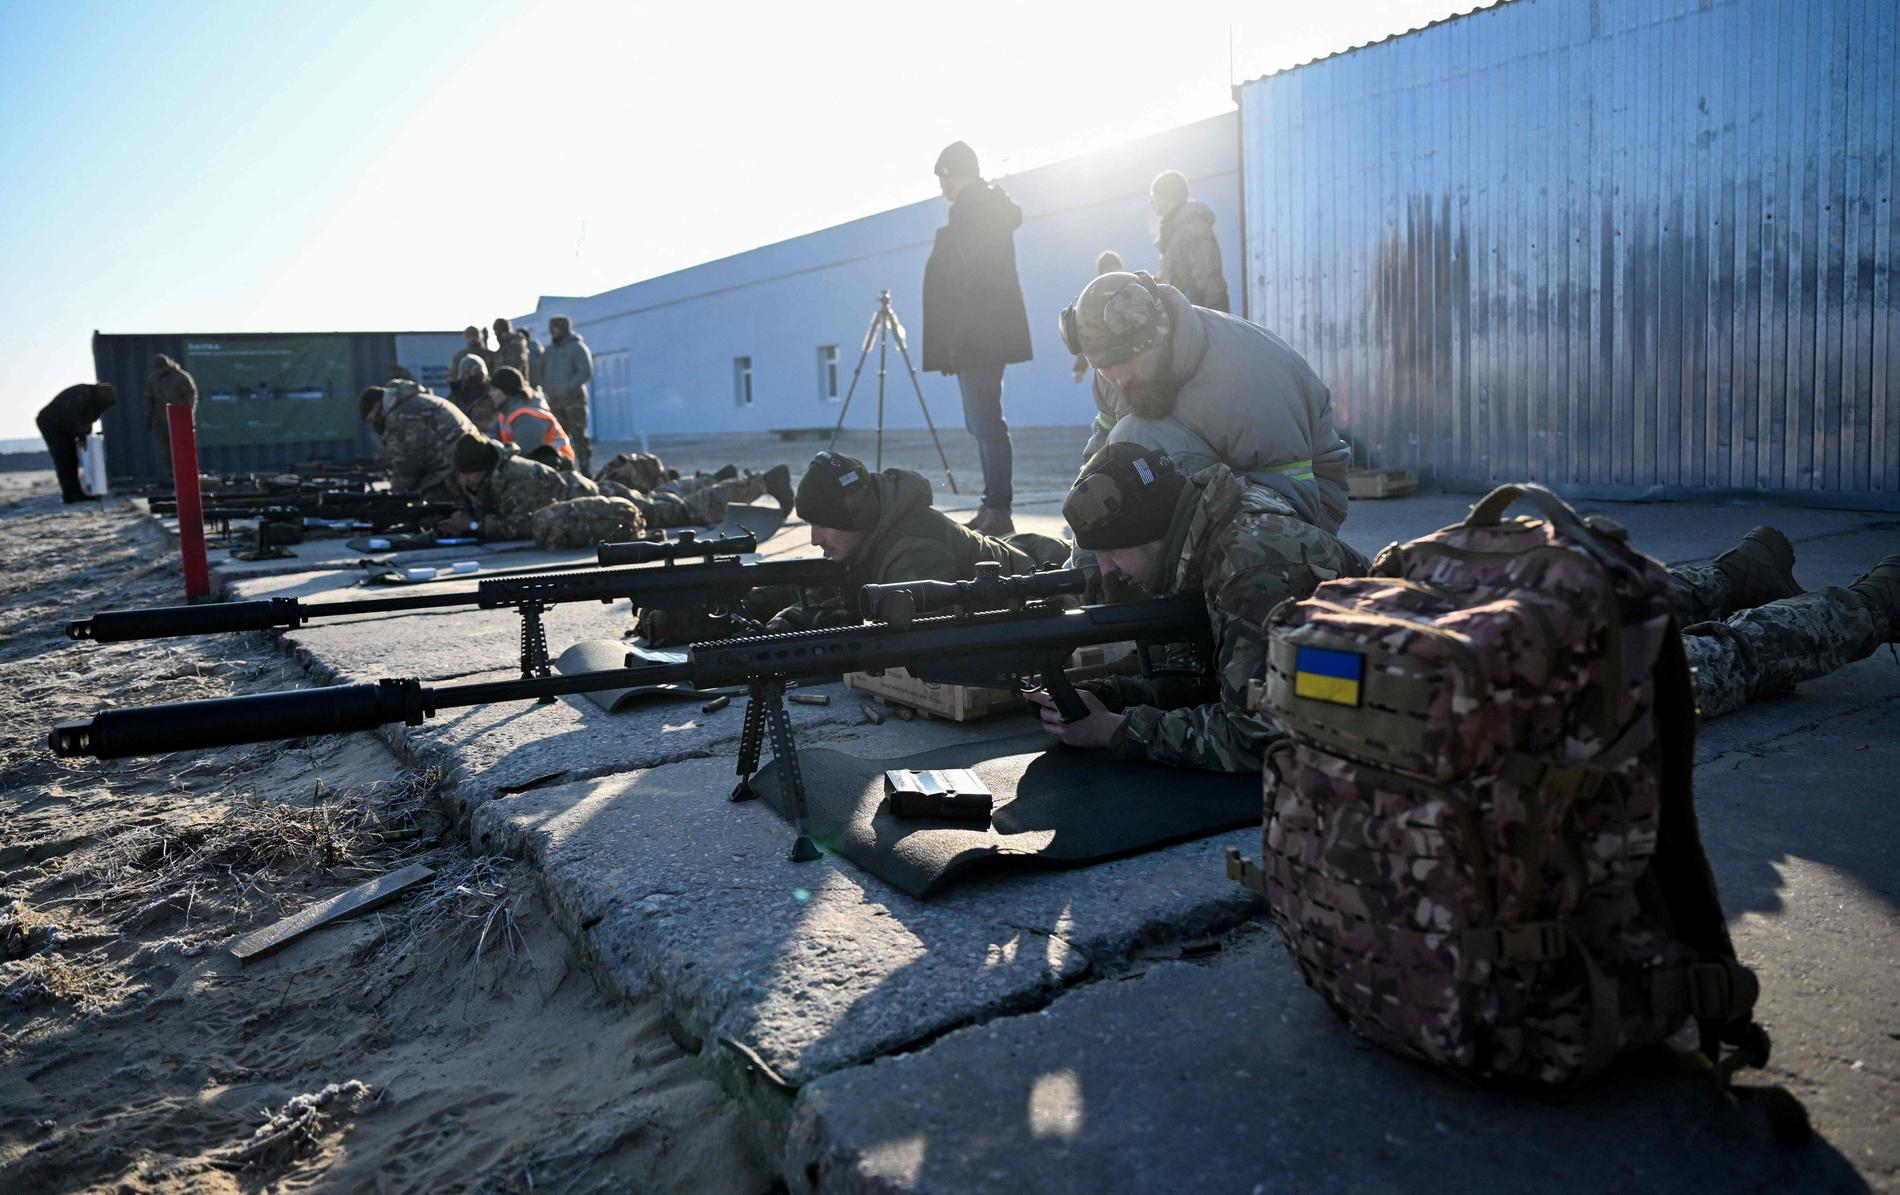 A Ukrainian sniper is said to have shot a Russian soldier 3,800 meters away.